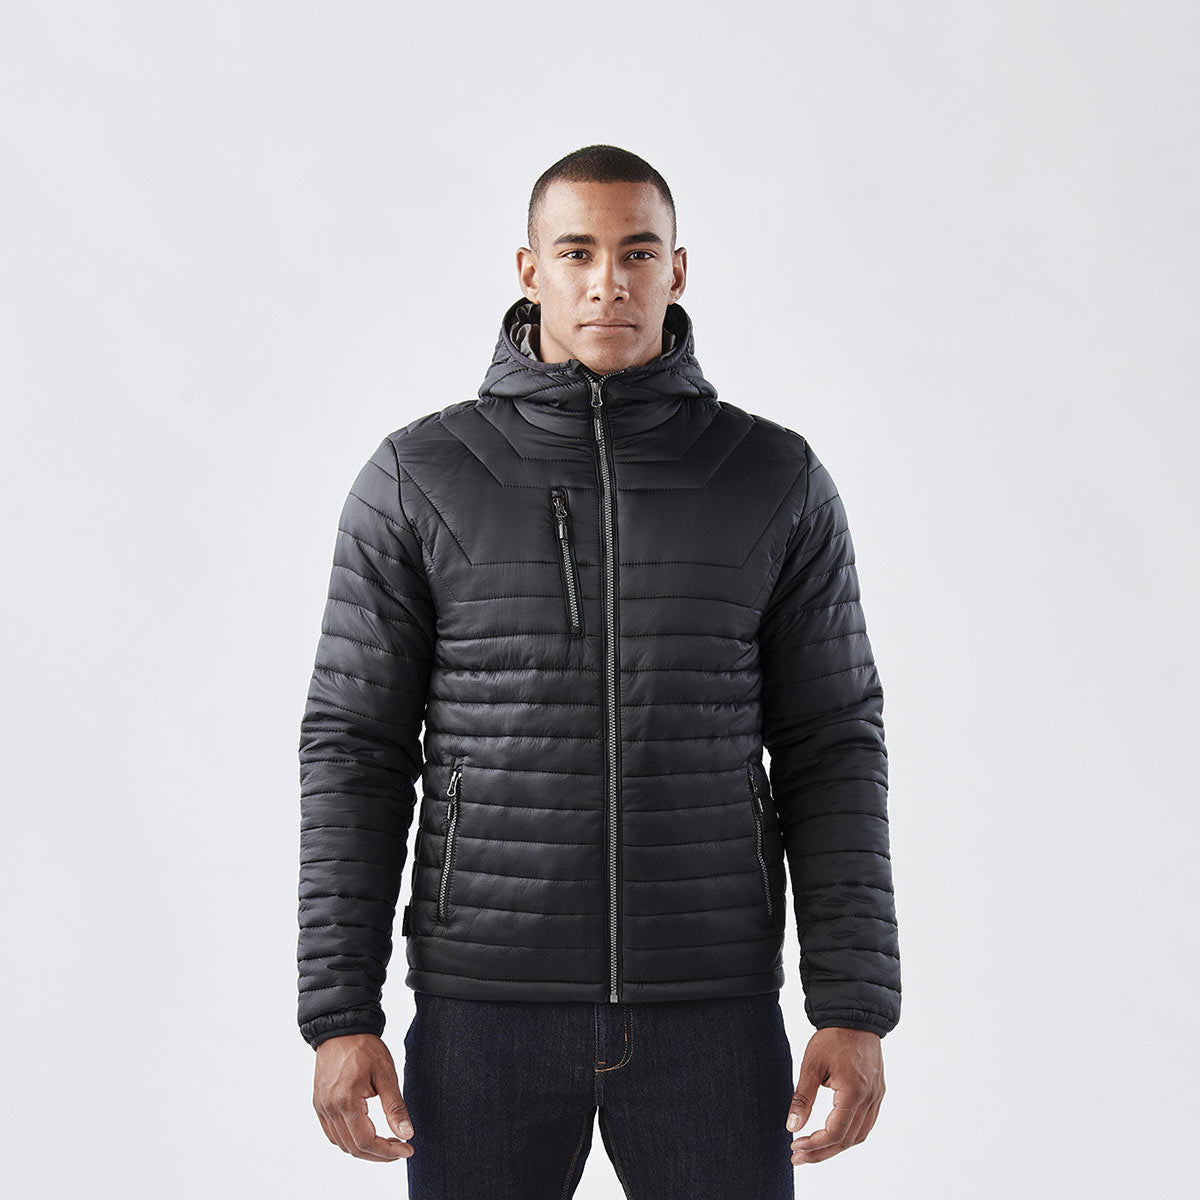 Stormtech ANX-1 Men's Zurich Thermal Jacket | Winter Insulated Coats and  Jackets | TuffShop.co.uk